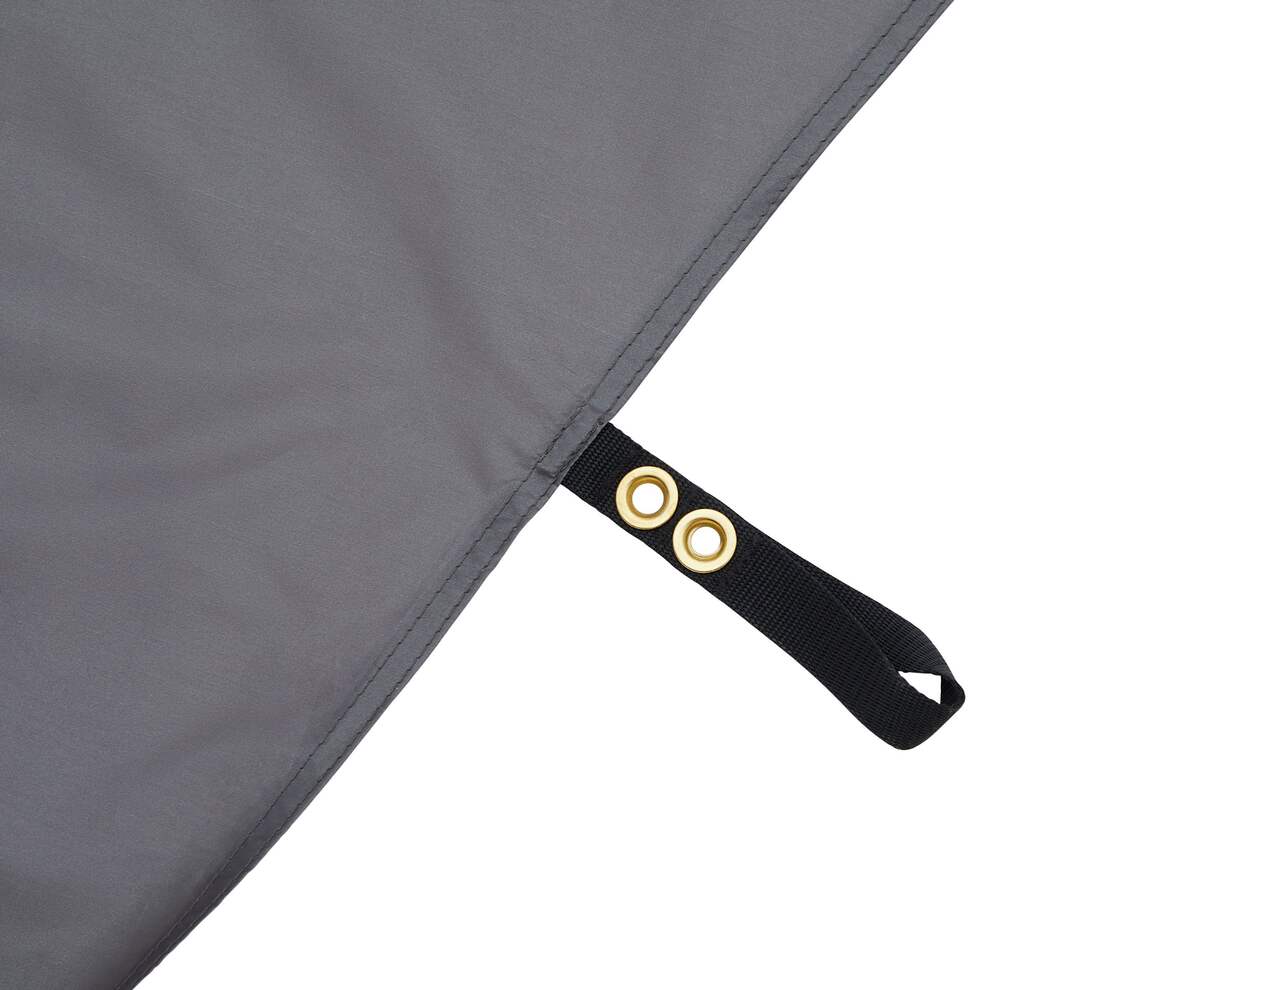 Outbound Compact Lightweight Microfibre Absorbent & Fast-Drying Camping  Sports Towel w/ Bag, 29 x 55-in